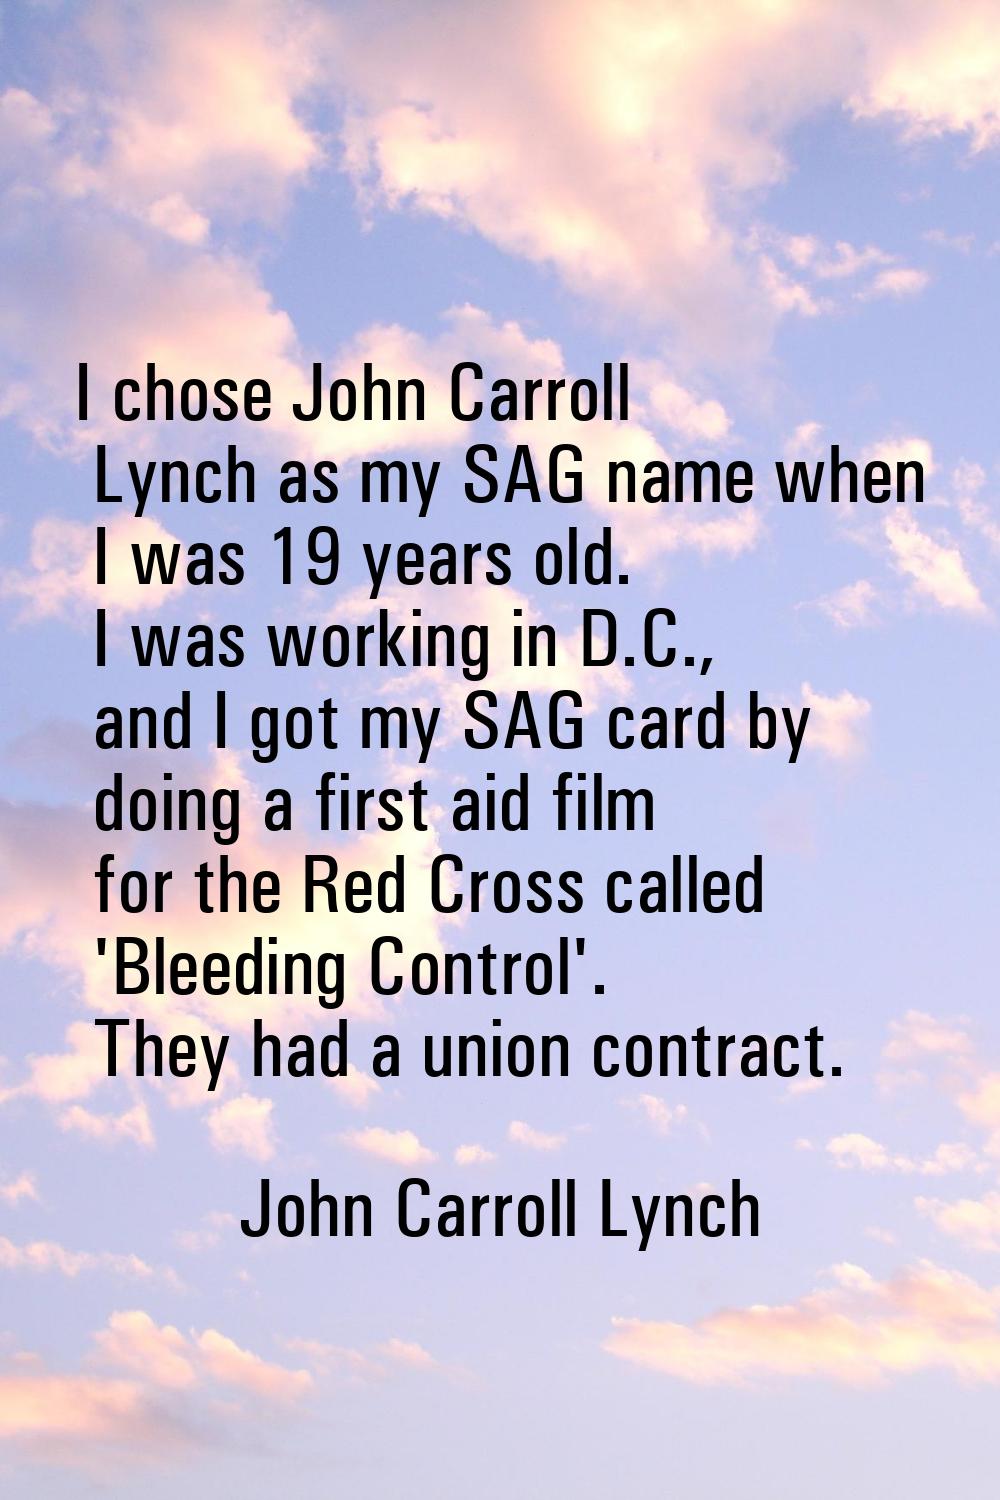 I chose John Carroll Lynch as my SAG name when I was 19 years old. I was working in D.C., and I got